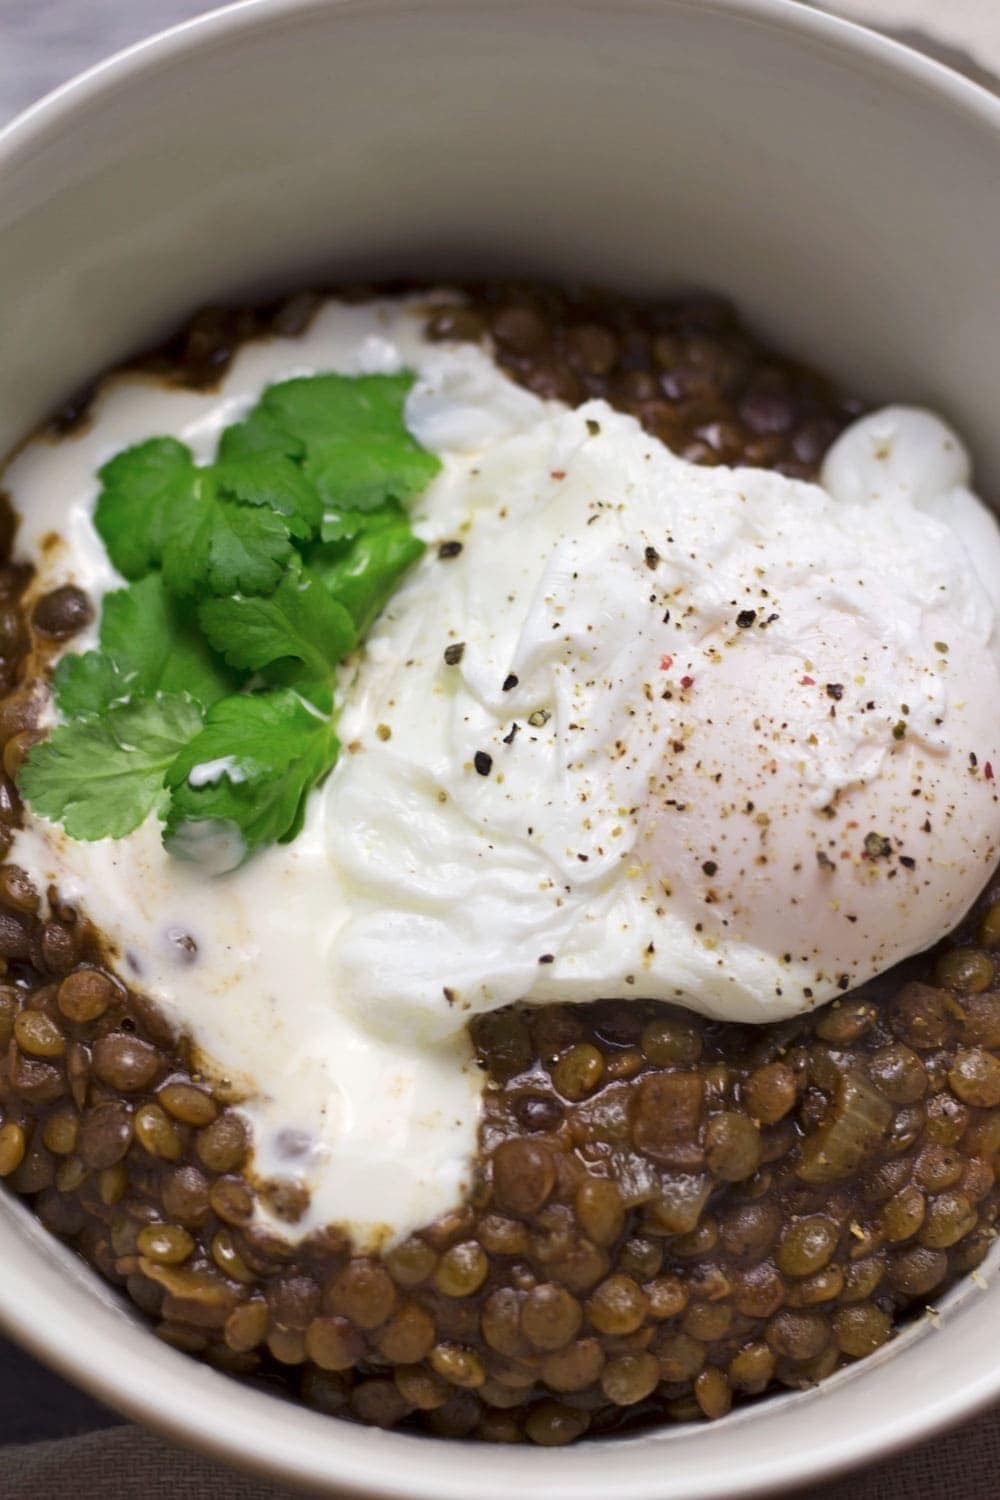 These berbere lentils are healthy, filling and delicious. With a poached egg and Greek yoghurt on top they're a complete meal!